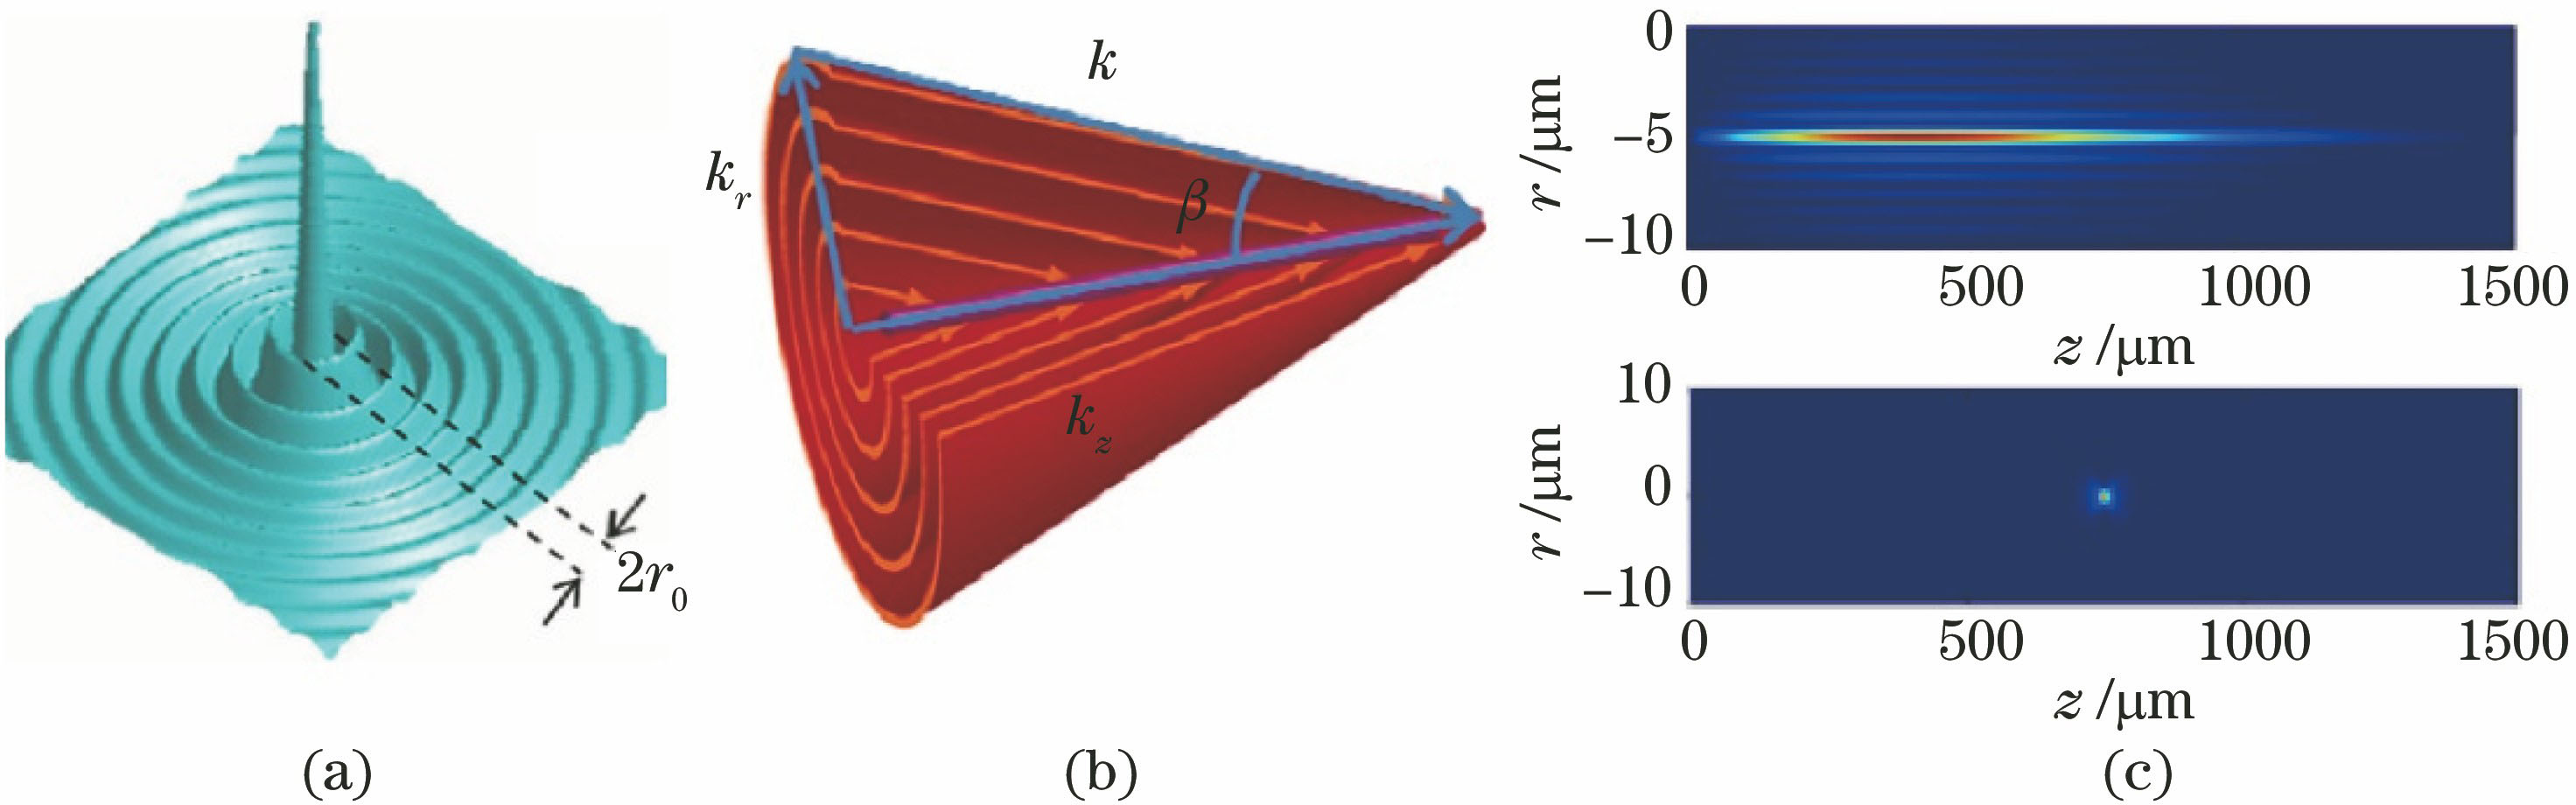 Bessel beam[63]. (a) Schematic of focal spot of Bessel beam; (b) schematic of wave vector relationship of Bessel beam; (c) focal spot intensity distribution of Bessel beam and Gaussian beam along propagation direction